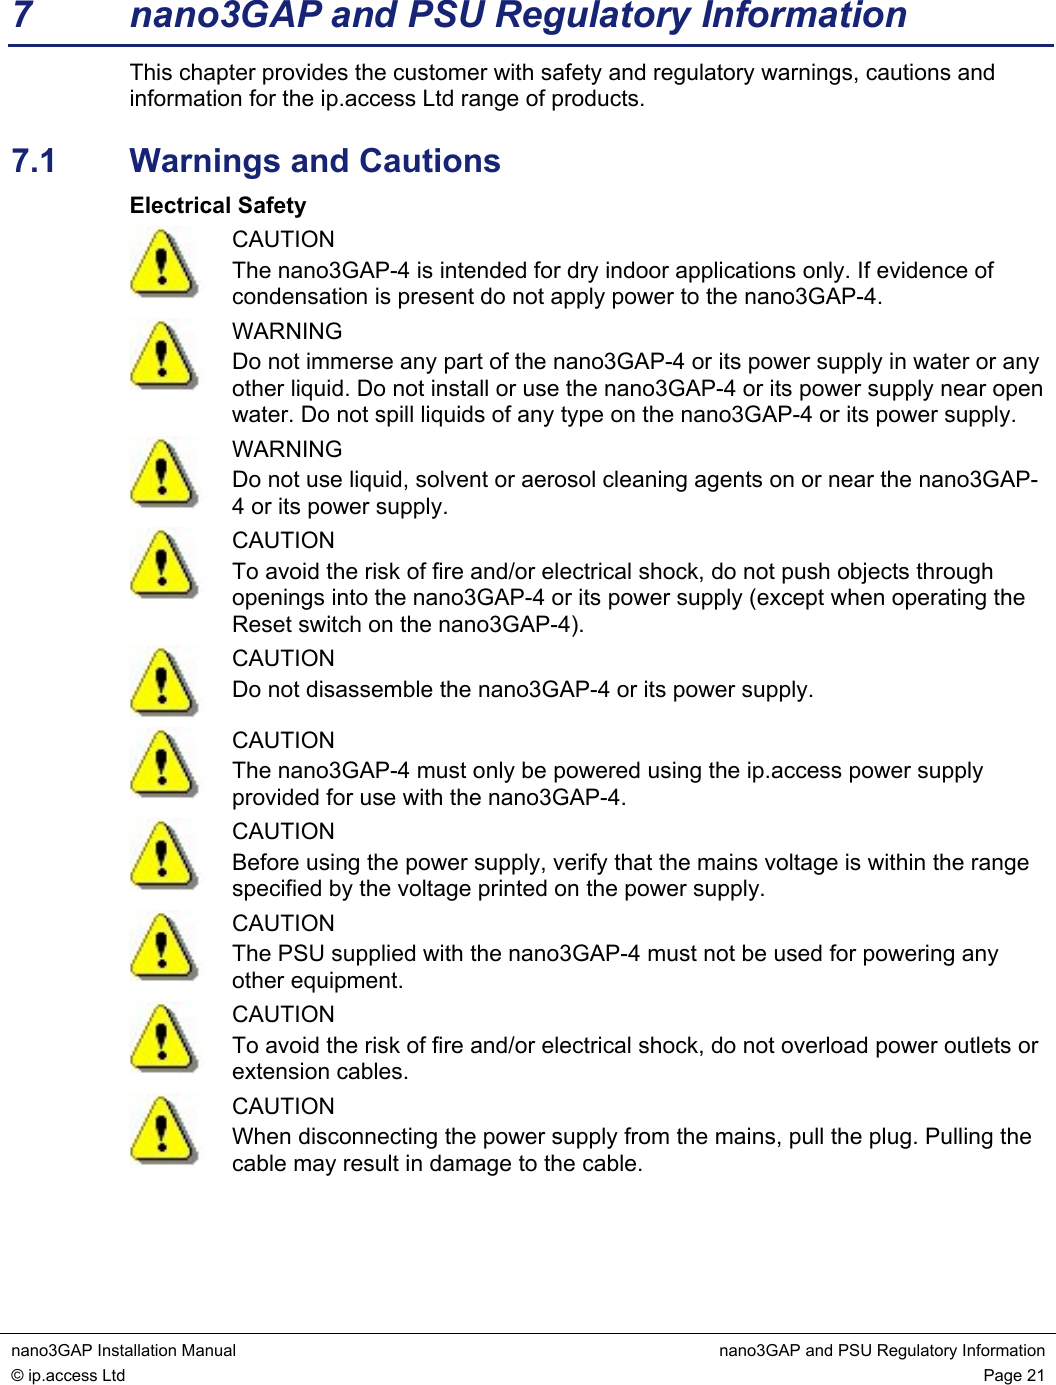  nano3GAP Installation Manual  nano3GAP and PSU Regulatory Information © ip.access Ltd  Page 21  7  nano3GAP and PSU Regulatory Information This chapter provides the customer with safety and regulatory warnings, cautions and information for the ip.access Ltd range of products. 7.1  Warnings and Cautions Electrical Safety  CAUTION The nano3GAP-4 is intended for dry indoor applications only. If evidence of condensation is present do not apply power to the nano3GAP-4.  WARNING Do not immerse any part of the nano3GAP-4 or its power supply in water or any other liquid. Do not install or use the nano3GAP-4 or its power supply near open water. Do not spill liquids of any type on the nano3GAP-4 or its power supply.  WARNING Do not use liquid, solvent or aerosol cleaning agents on or near the nano3GAP-4 or its power supply.  CAUTION To avoid the risk of fire and/or electrical shock, do not push objects through openings into the nano3GAP-4 or its power supply (except when operating the Reset switch on the nano3GAP-4).  CAUTION Do not disassemble the nano3GAP-4 or its power supply.  CAUTION The nano3GAP-4 must only be powered using the ip.access power supply provided for use with the nano3GAP-4.  CAUTION Before using the power supply, verify that the mains voltage is within the range specified by the voltage printed on the power supply.  CAUTION The PSU supplied with the nano3GAP-4 must not be used for powering any other equipment.  CAUTION To avoid the risk of fire and/or electrical shock, do not overload power outlets or extension cables.  CAUTION When disconnecting the power supply from the mains, pull the plug. Pulling the cable may result in damage to the cable.  